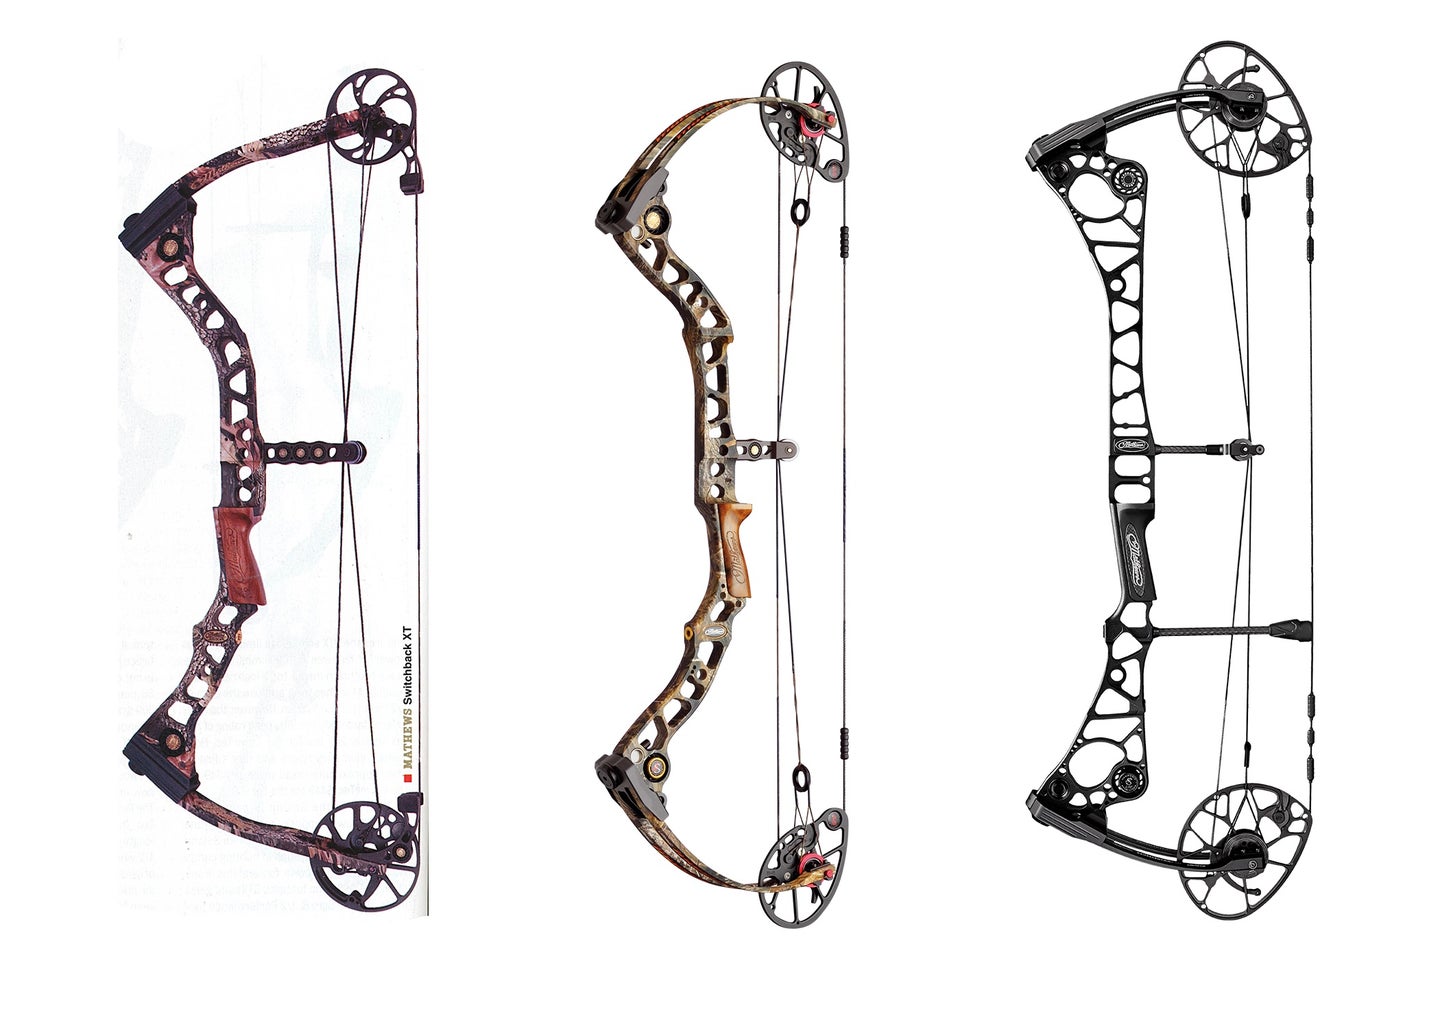 Testimonials from actual users of the Bow Maker from Pro Bow The